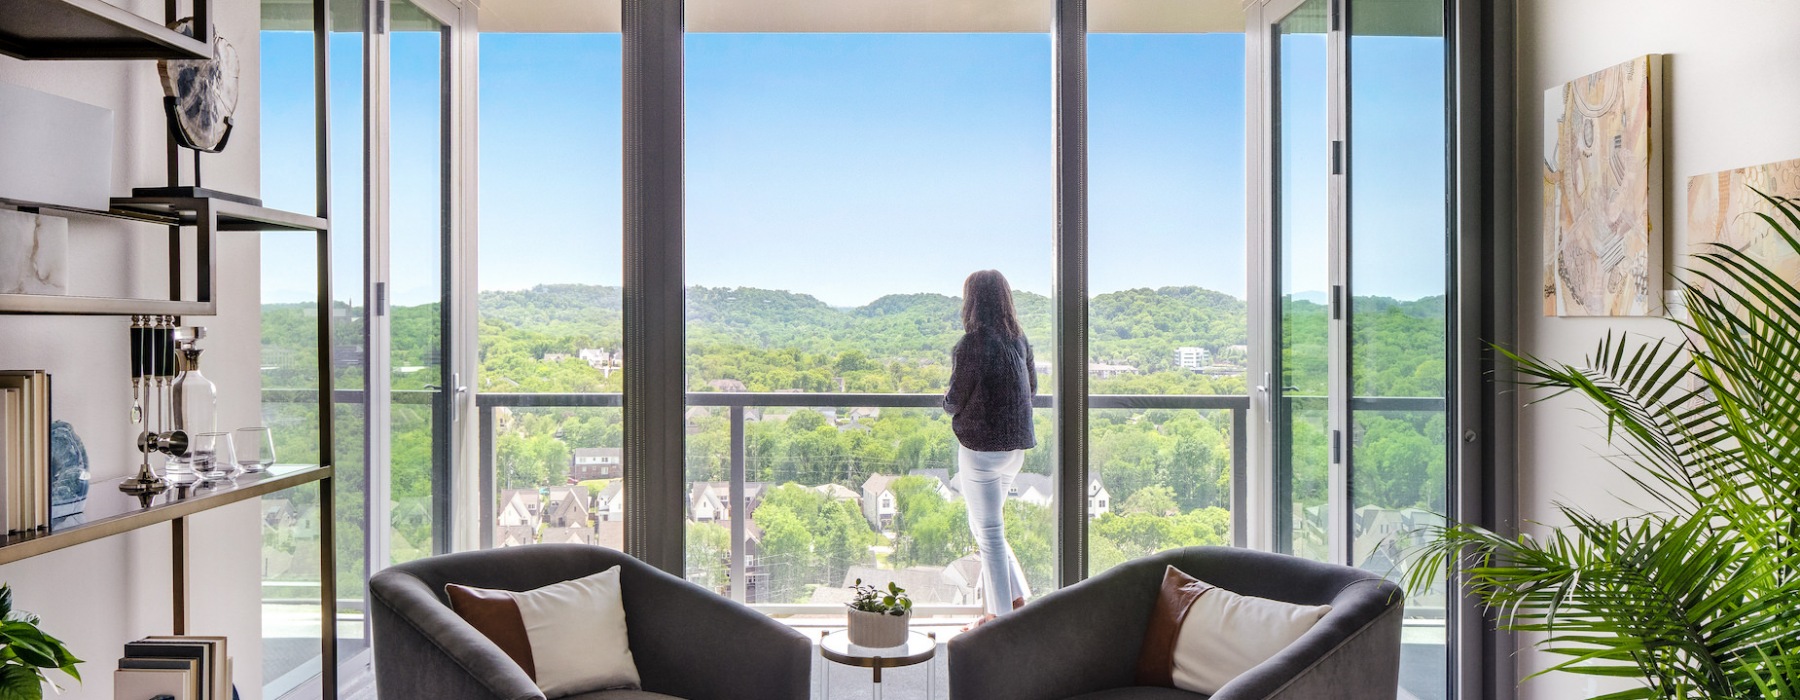 Woman overlooking landscape of green hills front penthouse